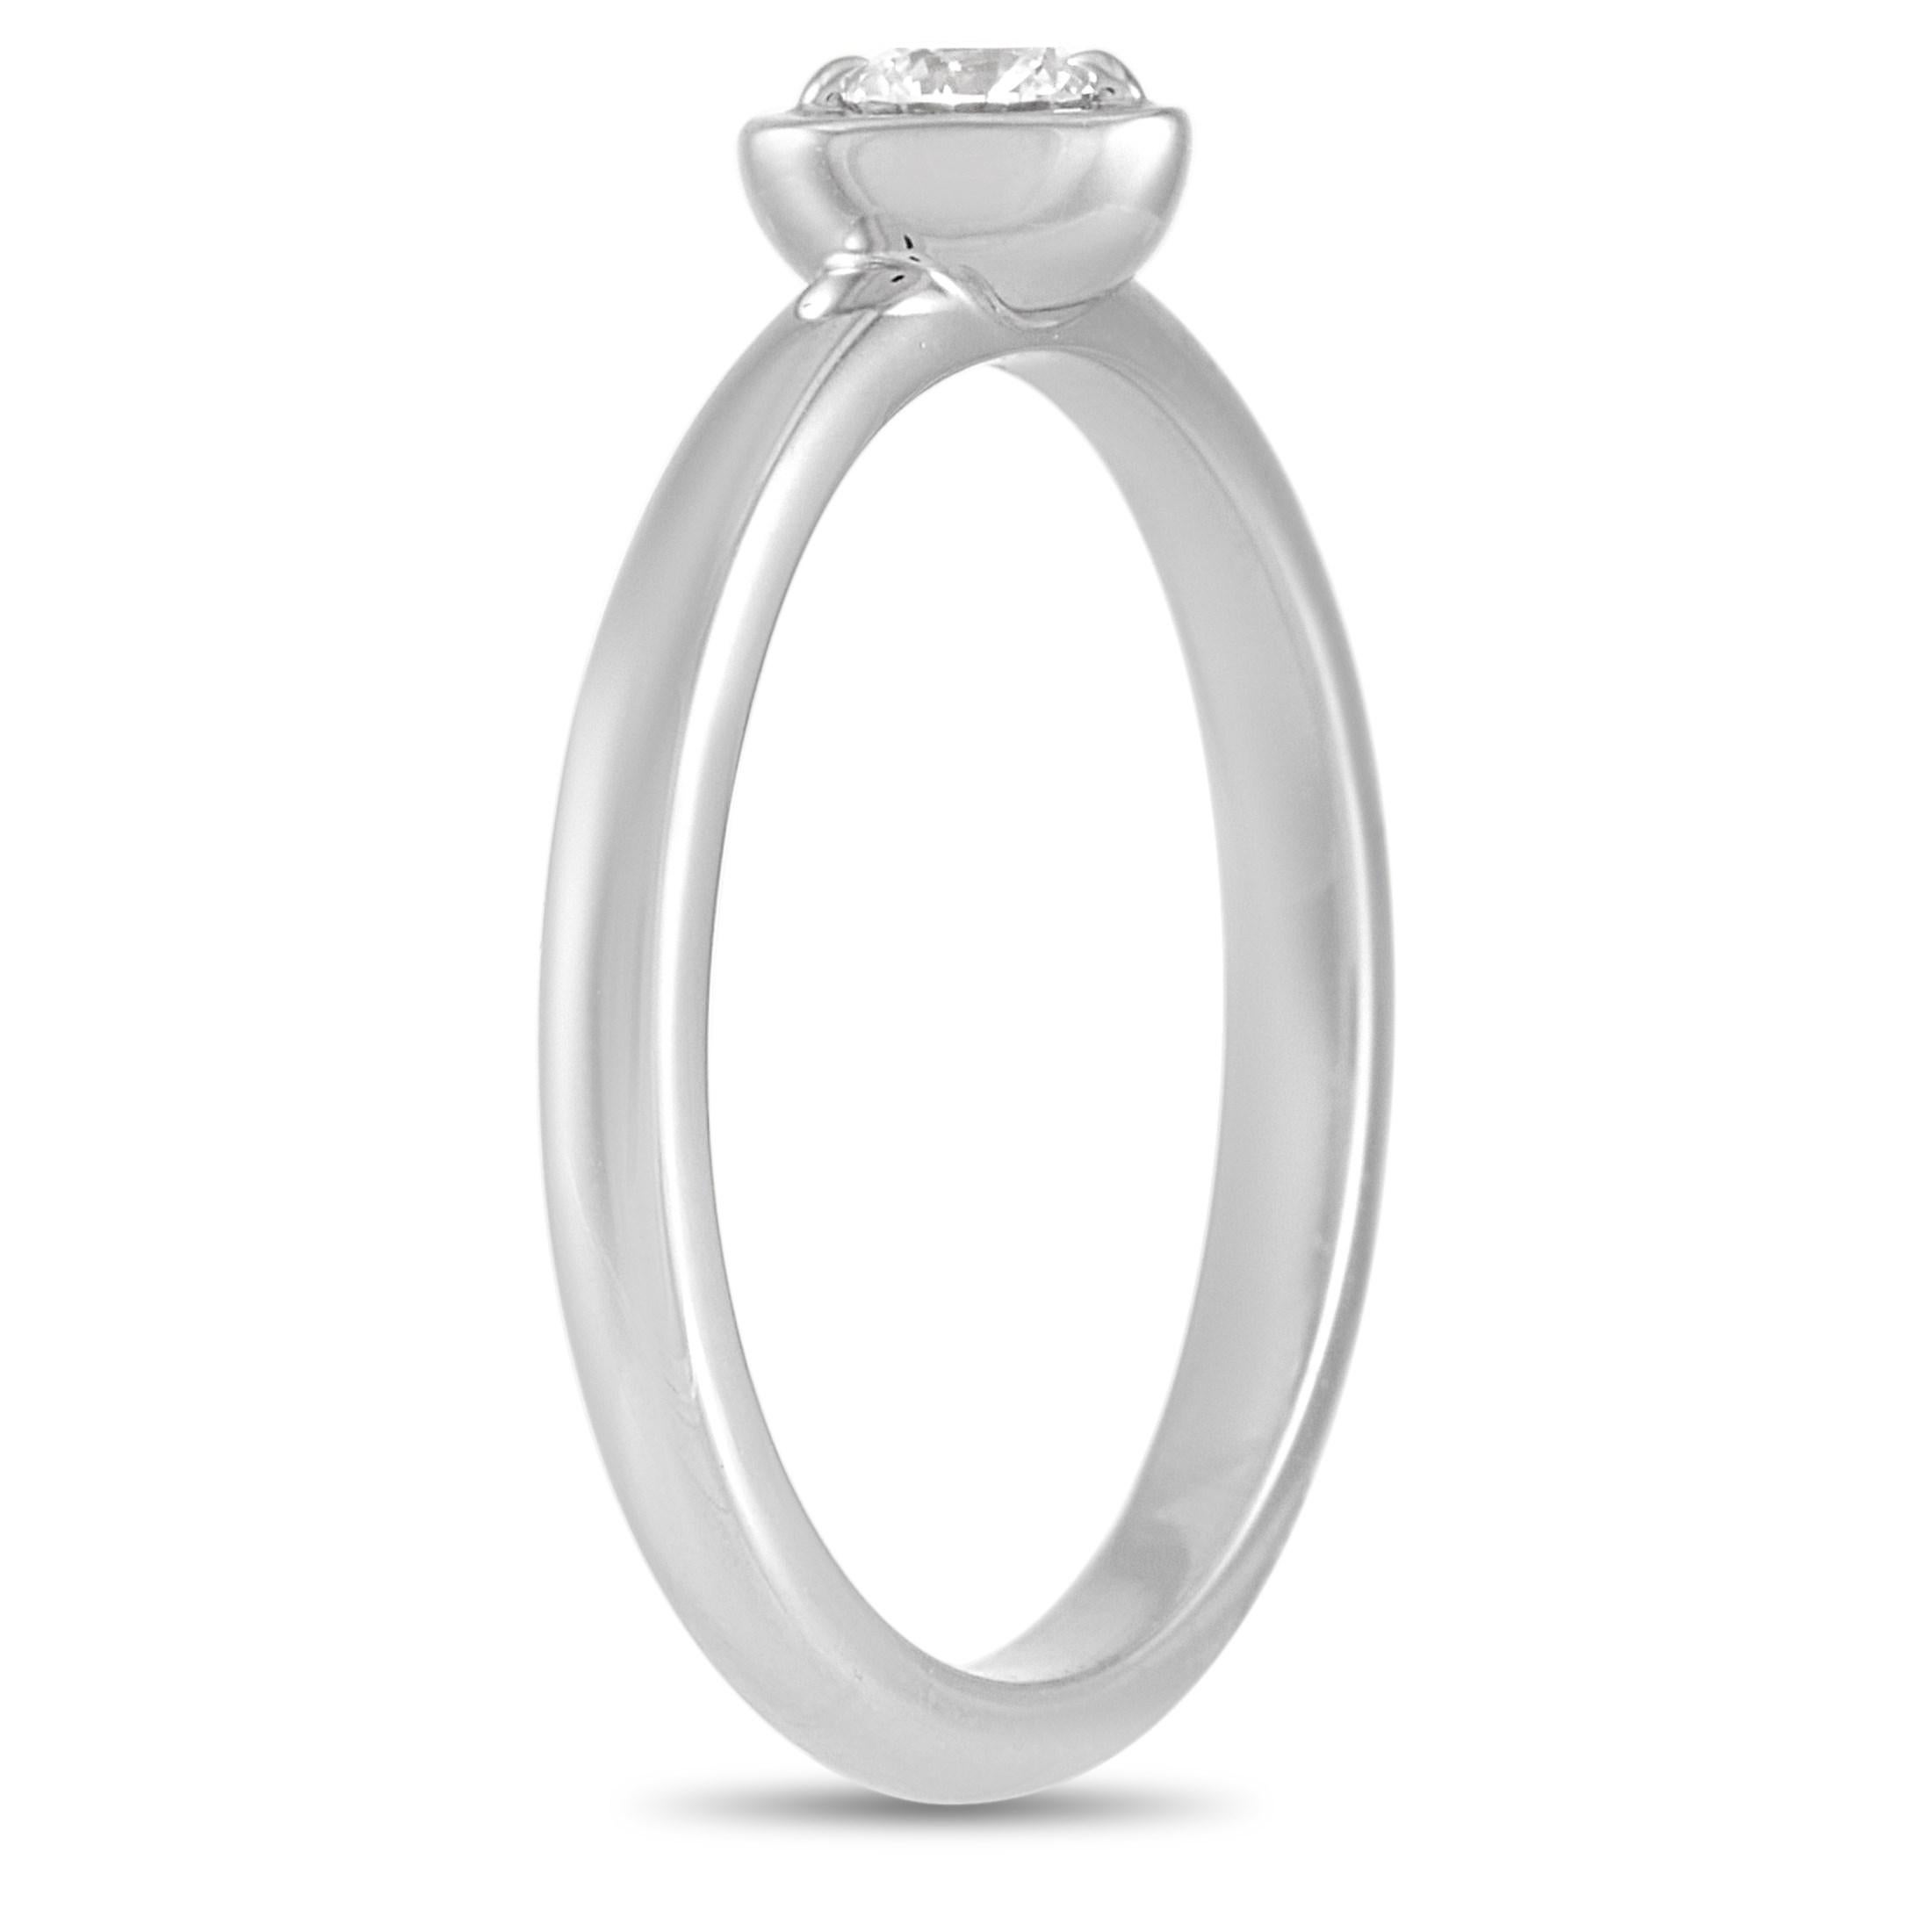 This Cartier 18K White Gold 0.12 ct Diamond Heart Ring puts a cute twist on the classic Diamond Solitaire Ring. The simple band is made with 18K white gold highlighting a 0.12 carat round-cut solitaire diamond set in a white gold heart and held in